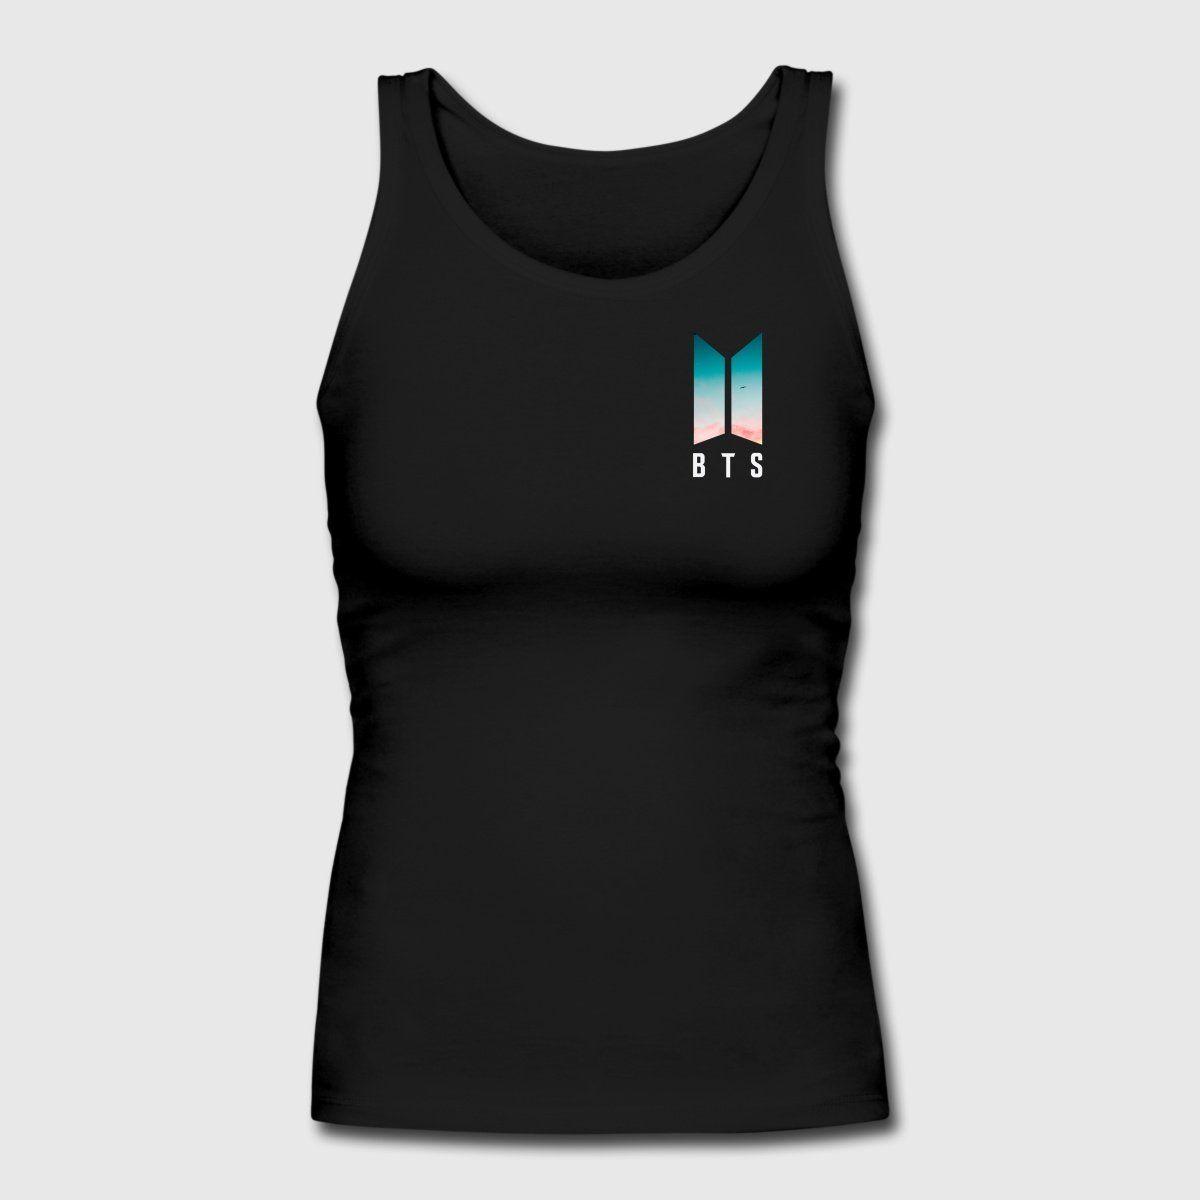 Sky Army Logo - BTS ARMY LOGO SKY FOR ANYWHERE Womens Longer Length Fitted Tank